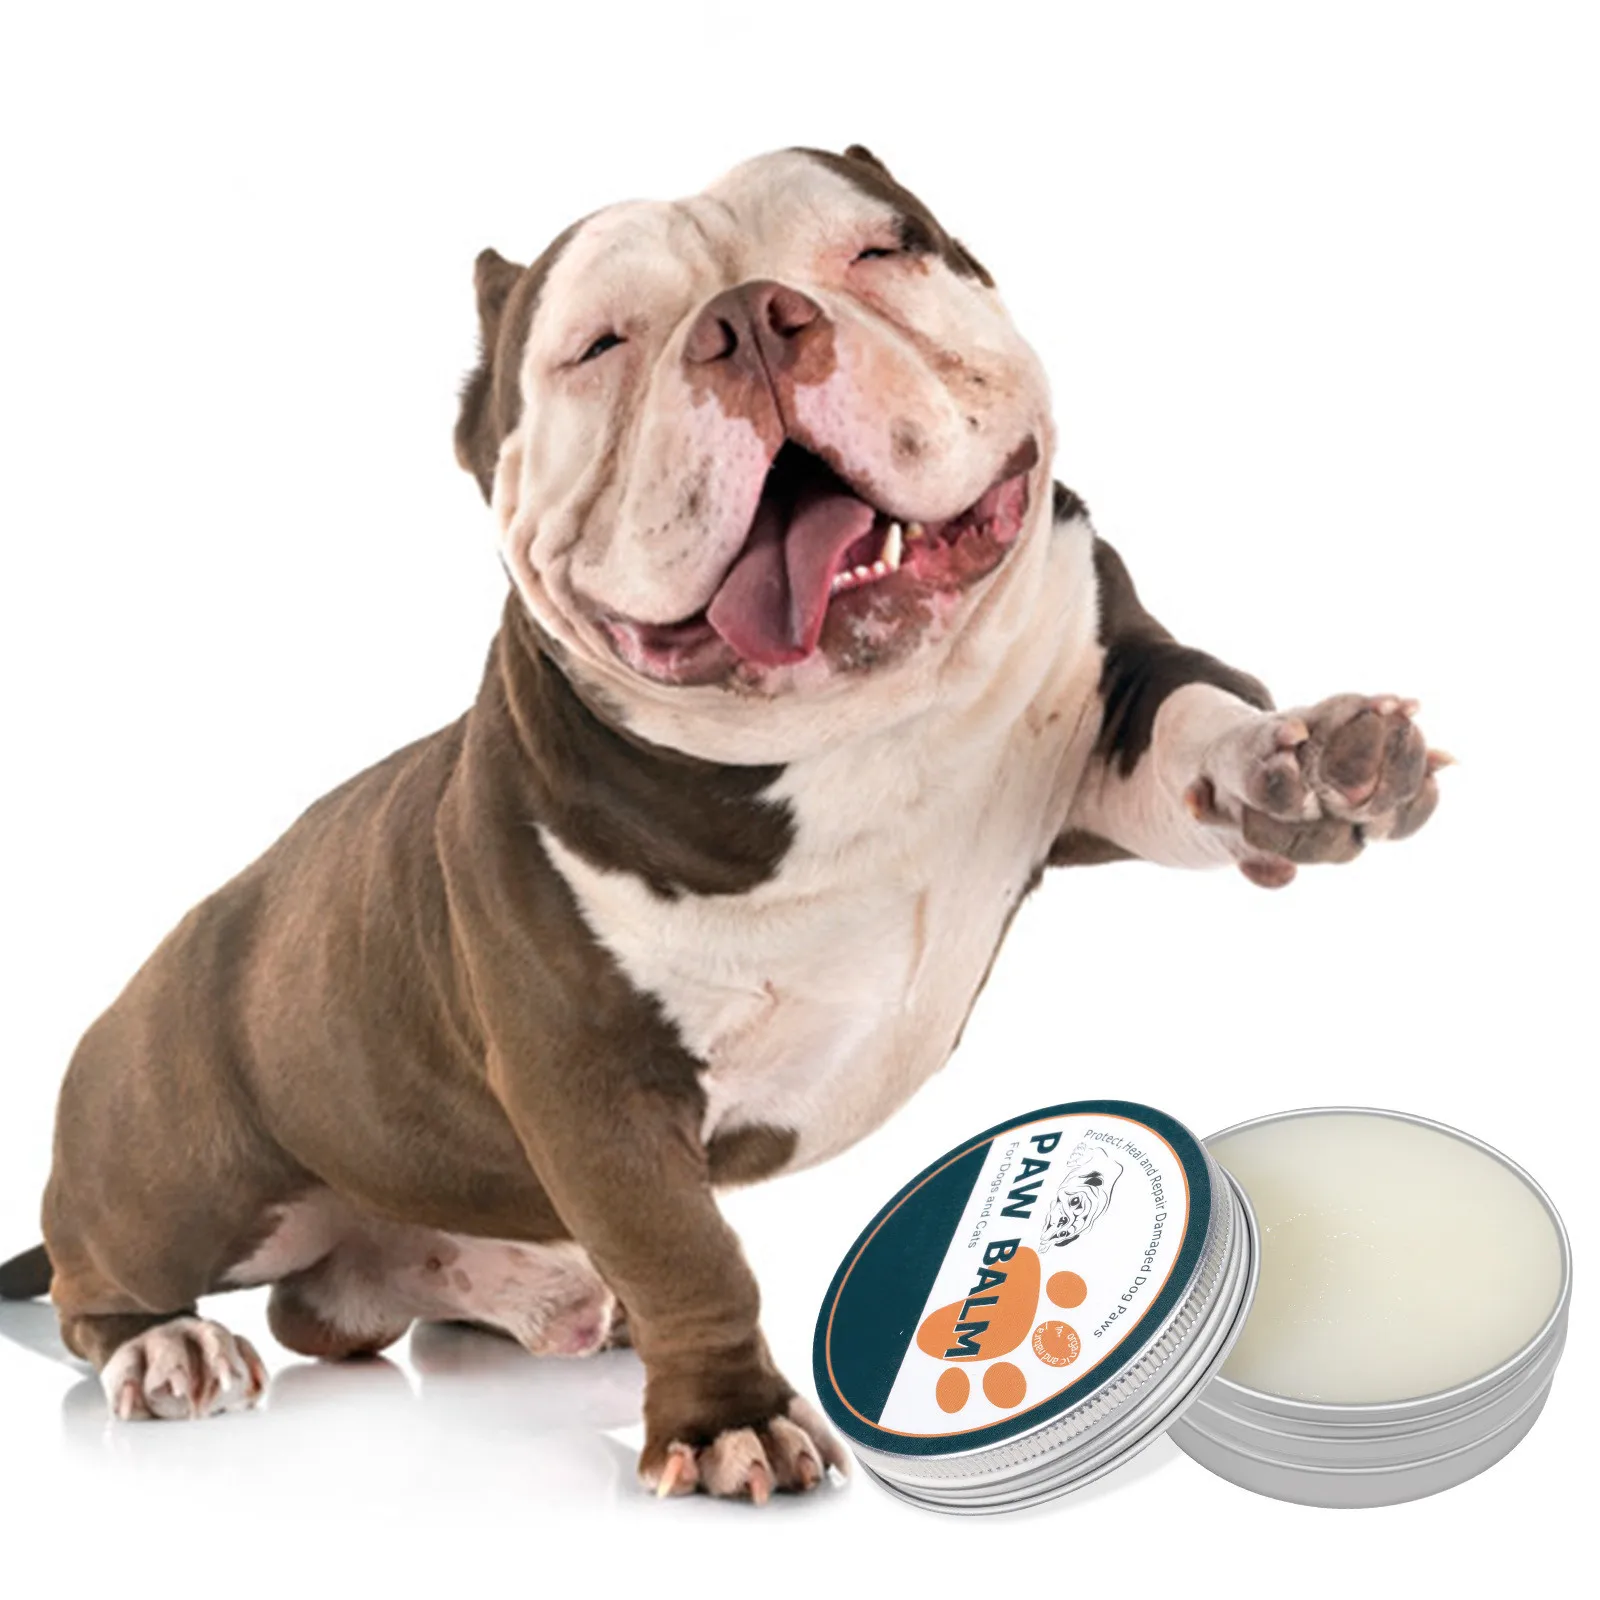 

OEM ODM Private Label Organic All-Natural Paw Wax Pet Paw Butter Heals Repairs Damaged Dog Paws Balm